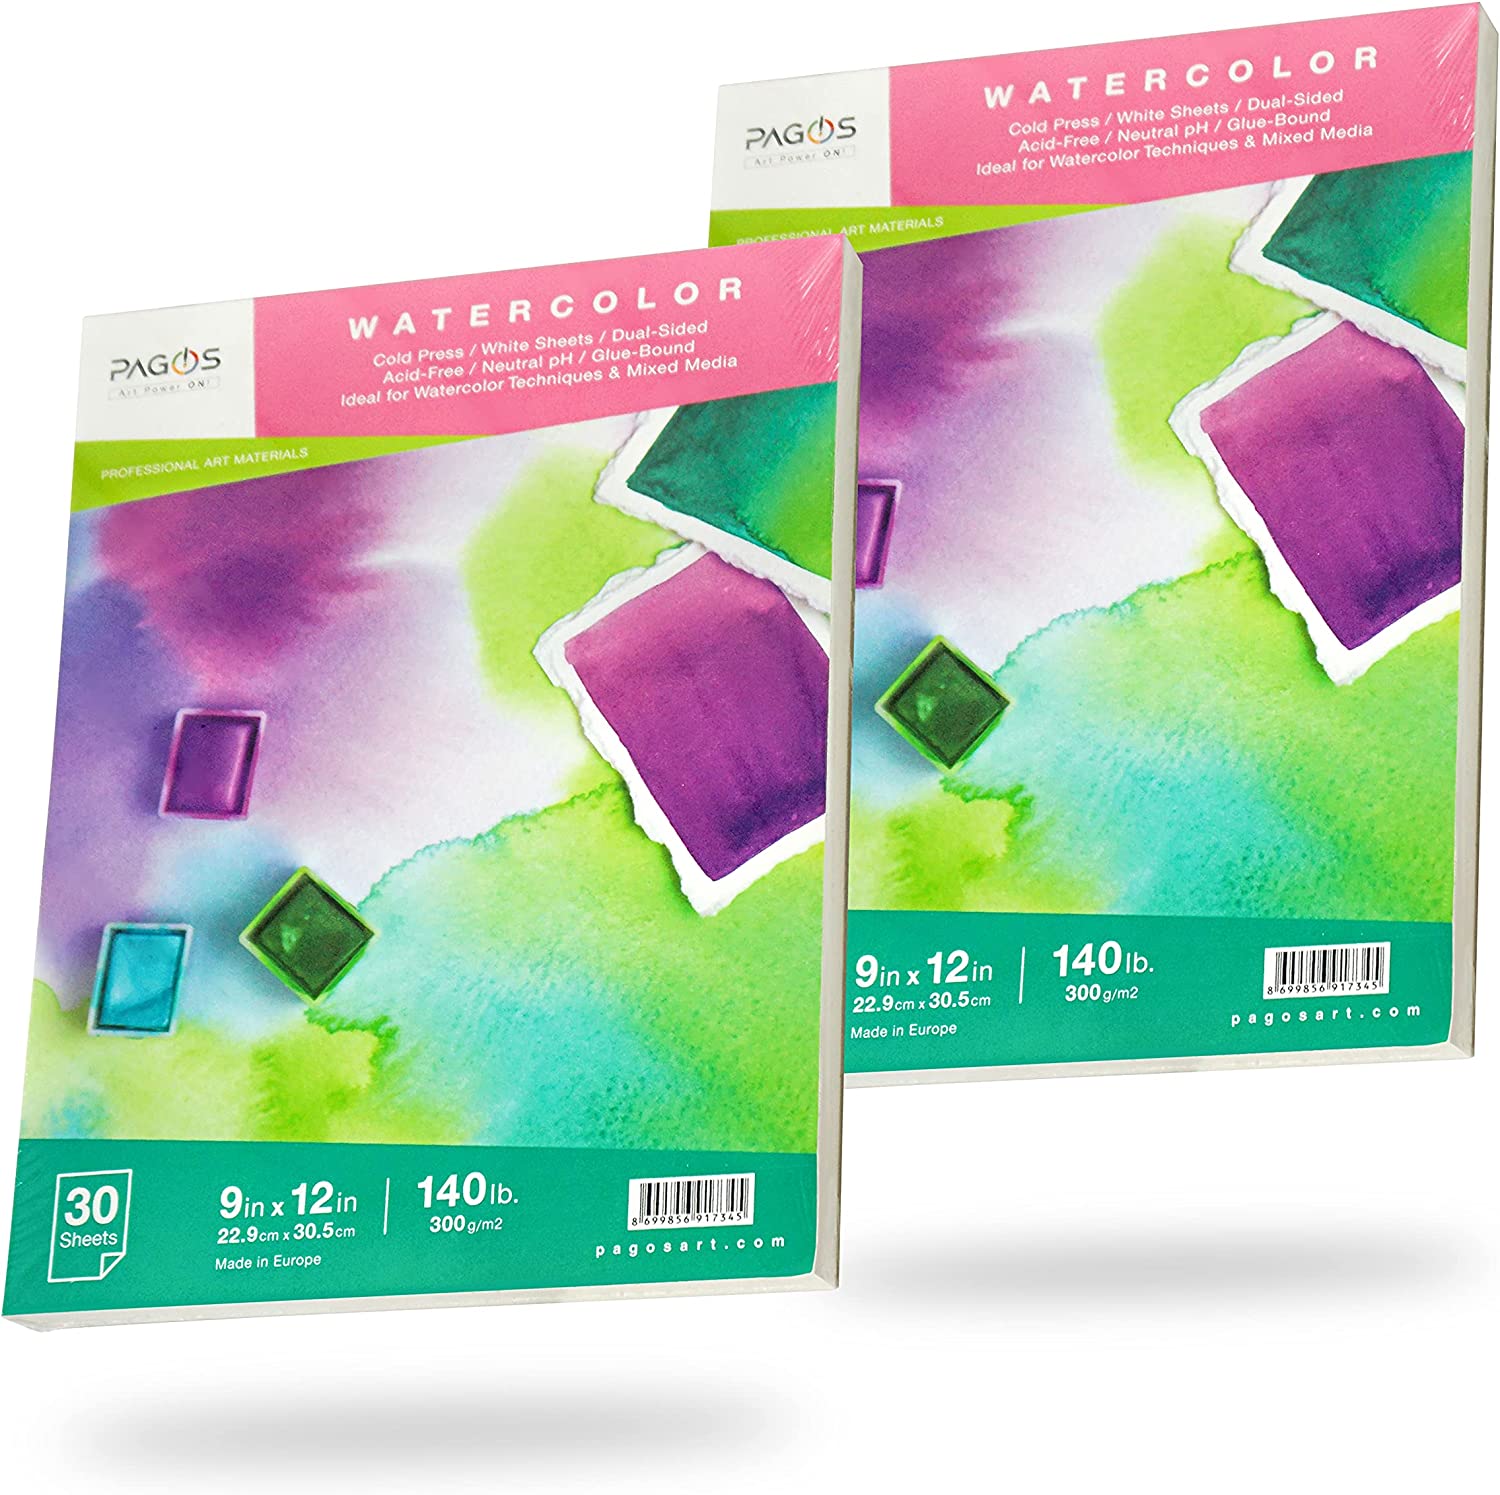 Pagos Watercolor Paper â€“ 60 White Sheets (9x12 inch) x 2 Pack | 140lb/300gsm | Dual-Sided | Glue Bound | Cold Pressed | Acid-Free Paper Pad Perfectly Use with Any Wet Medium (60 Sheets)